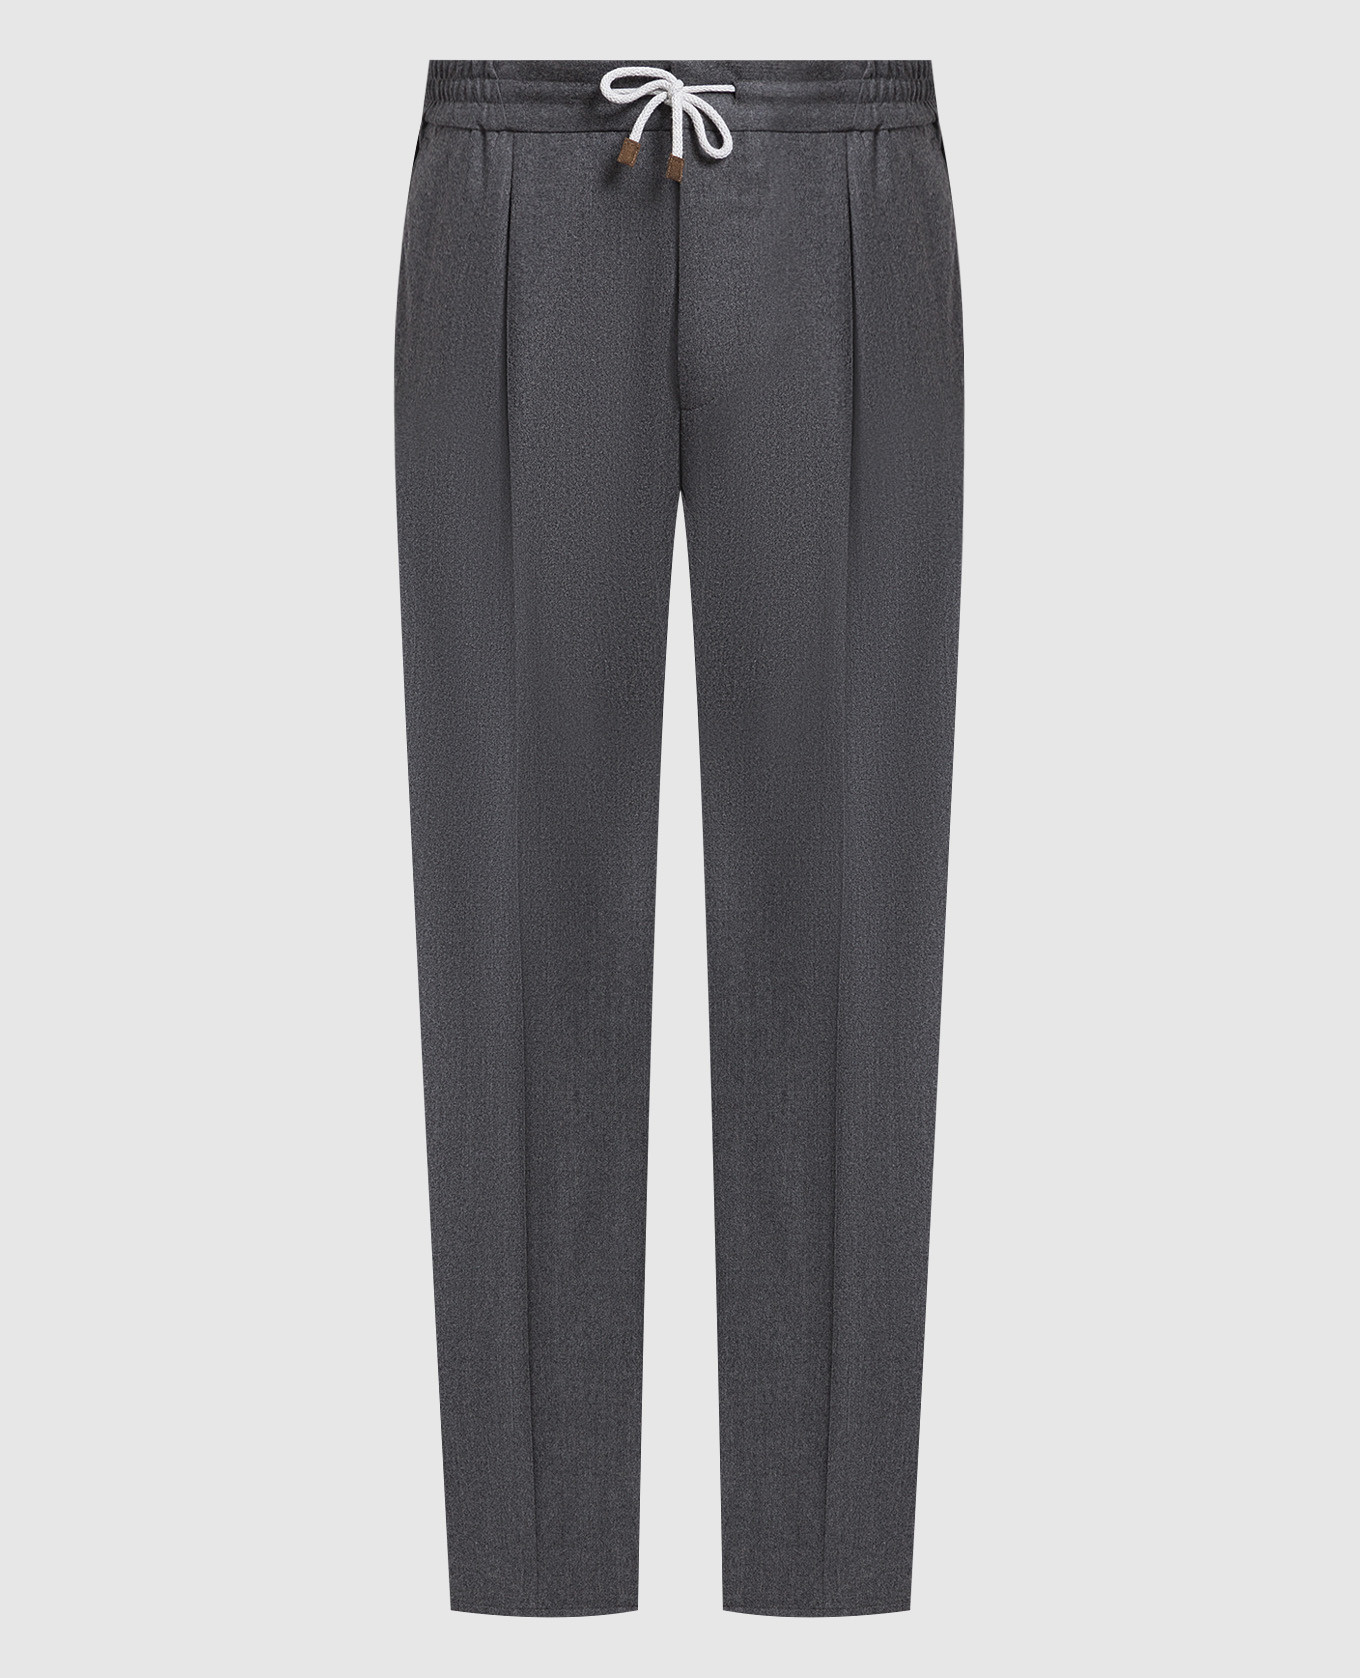 Gray wool trousers